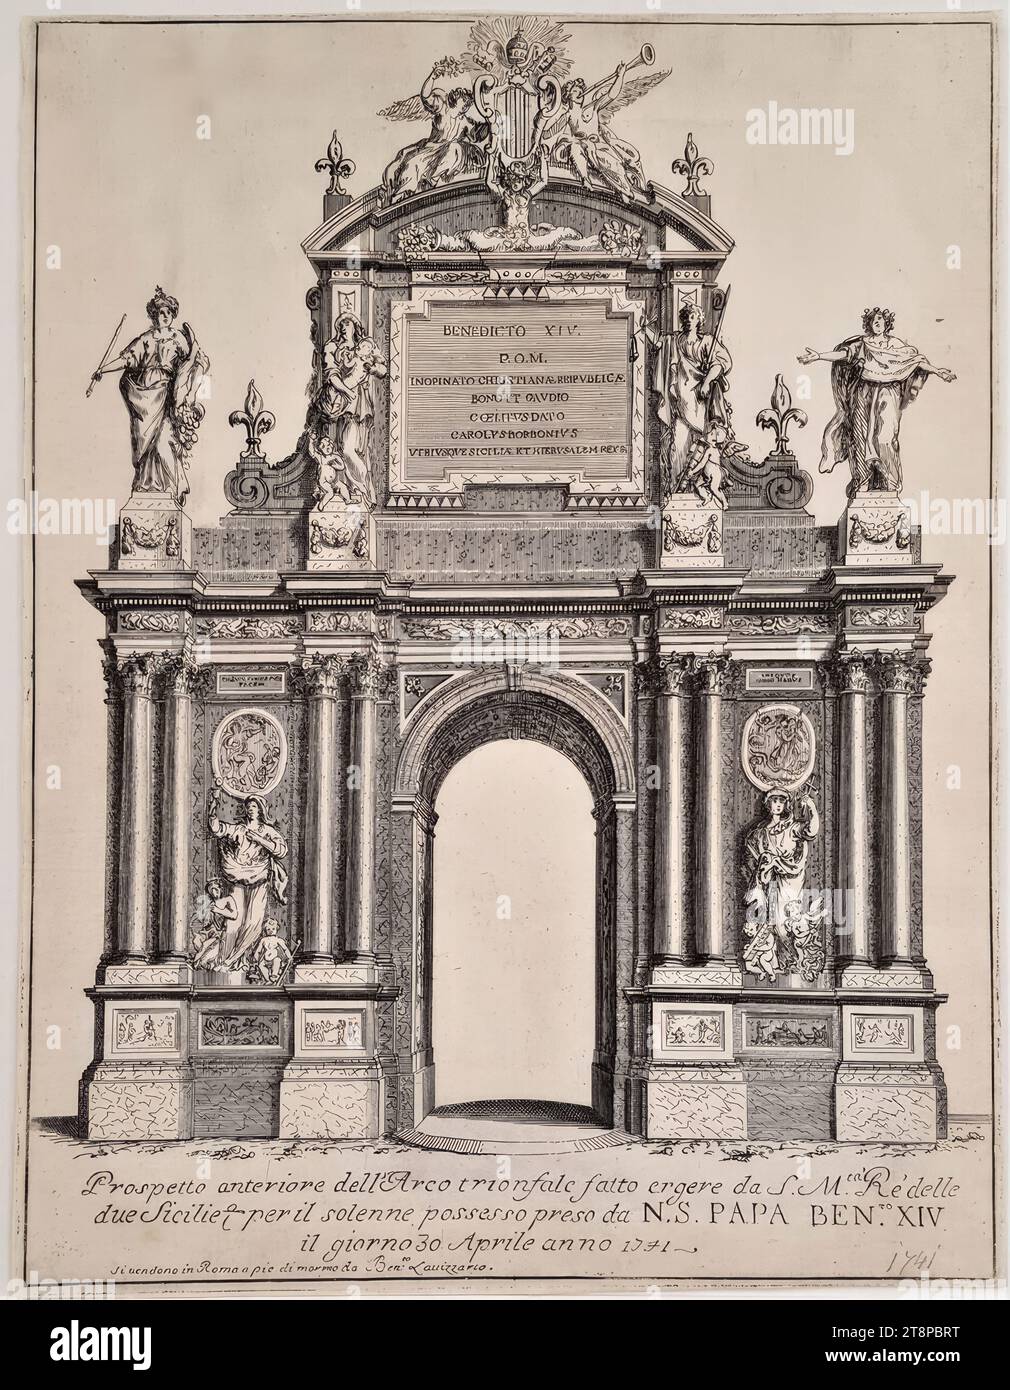 Triumphal arch of the King of the Two Sicilies in Rome on the occasion of the procession for Pope Benedict XIV to take possession of San Giovanni in Laterano on April 30, 1741, 1741, print, etching on paper, sheet: 27.8 × 21.4 cm, [r.u.] 'si vendono in Roma a pie di marmo da Ben.to Lavizzarco Stock Photo